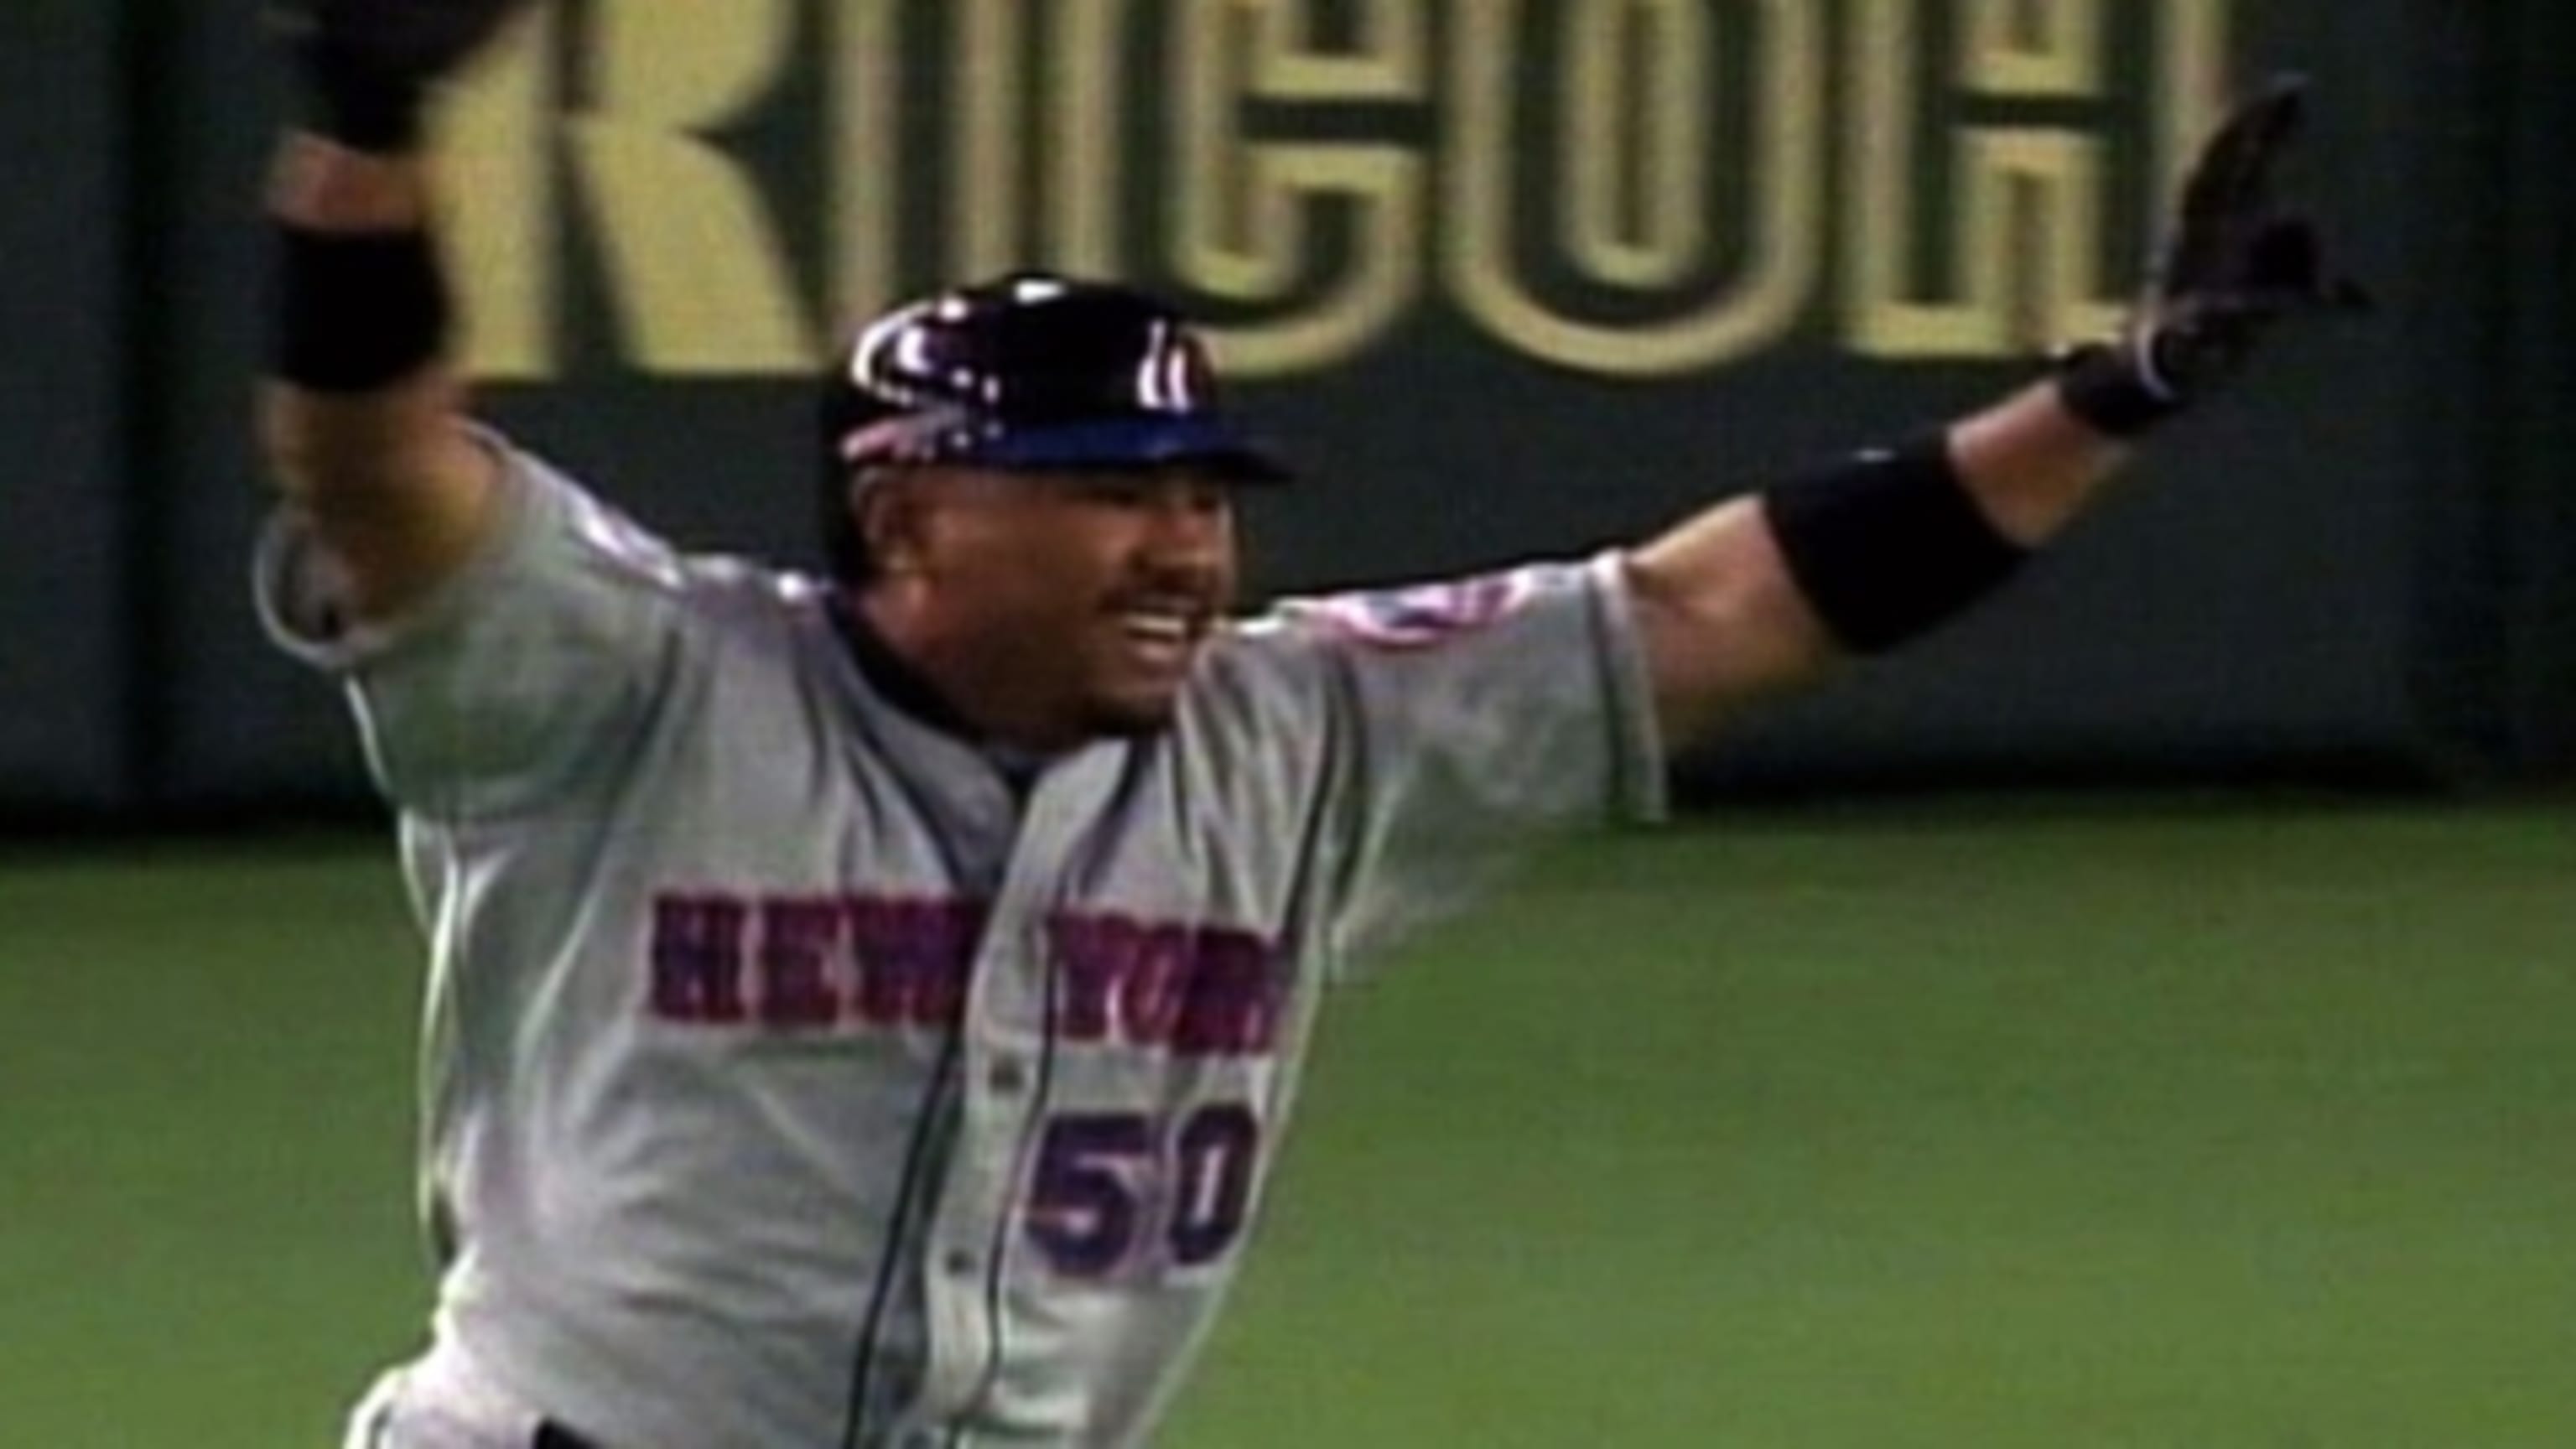 Benny Agbayani is a Mets cult hero